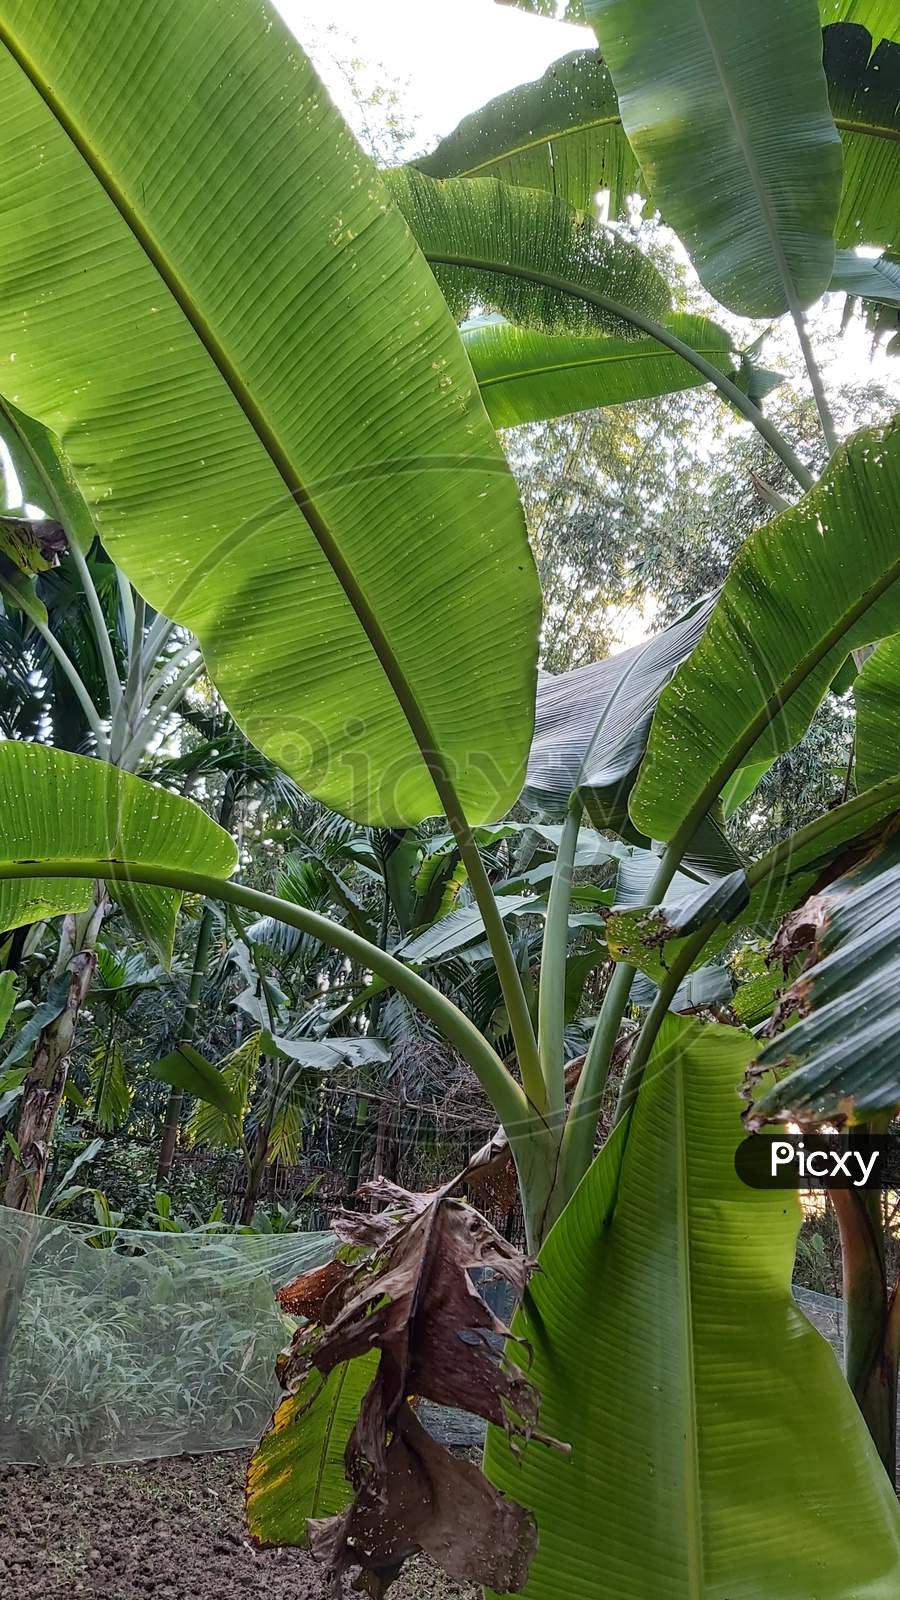 Banana tree leaf and areca nut and betel leaves in village